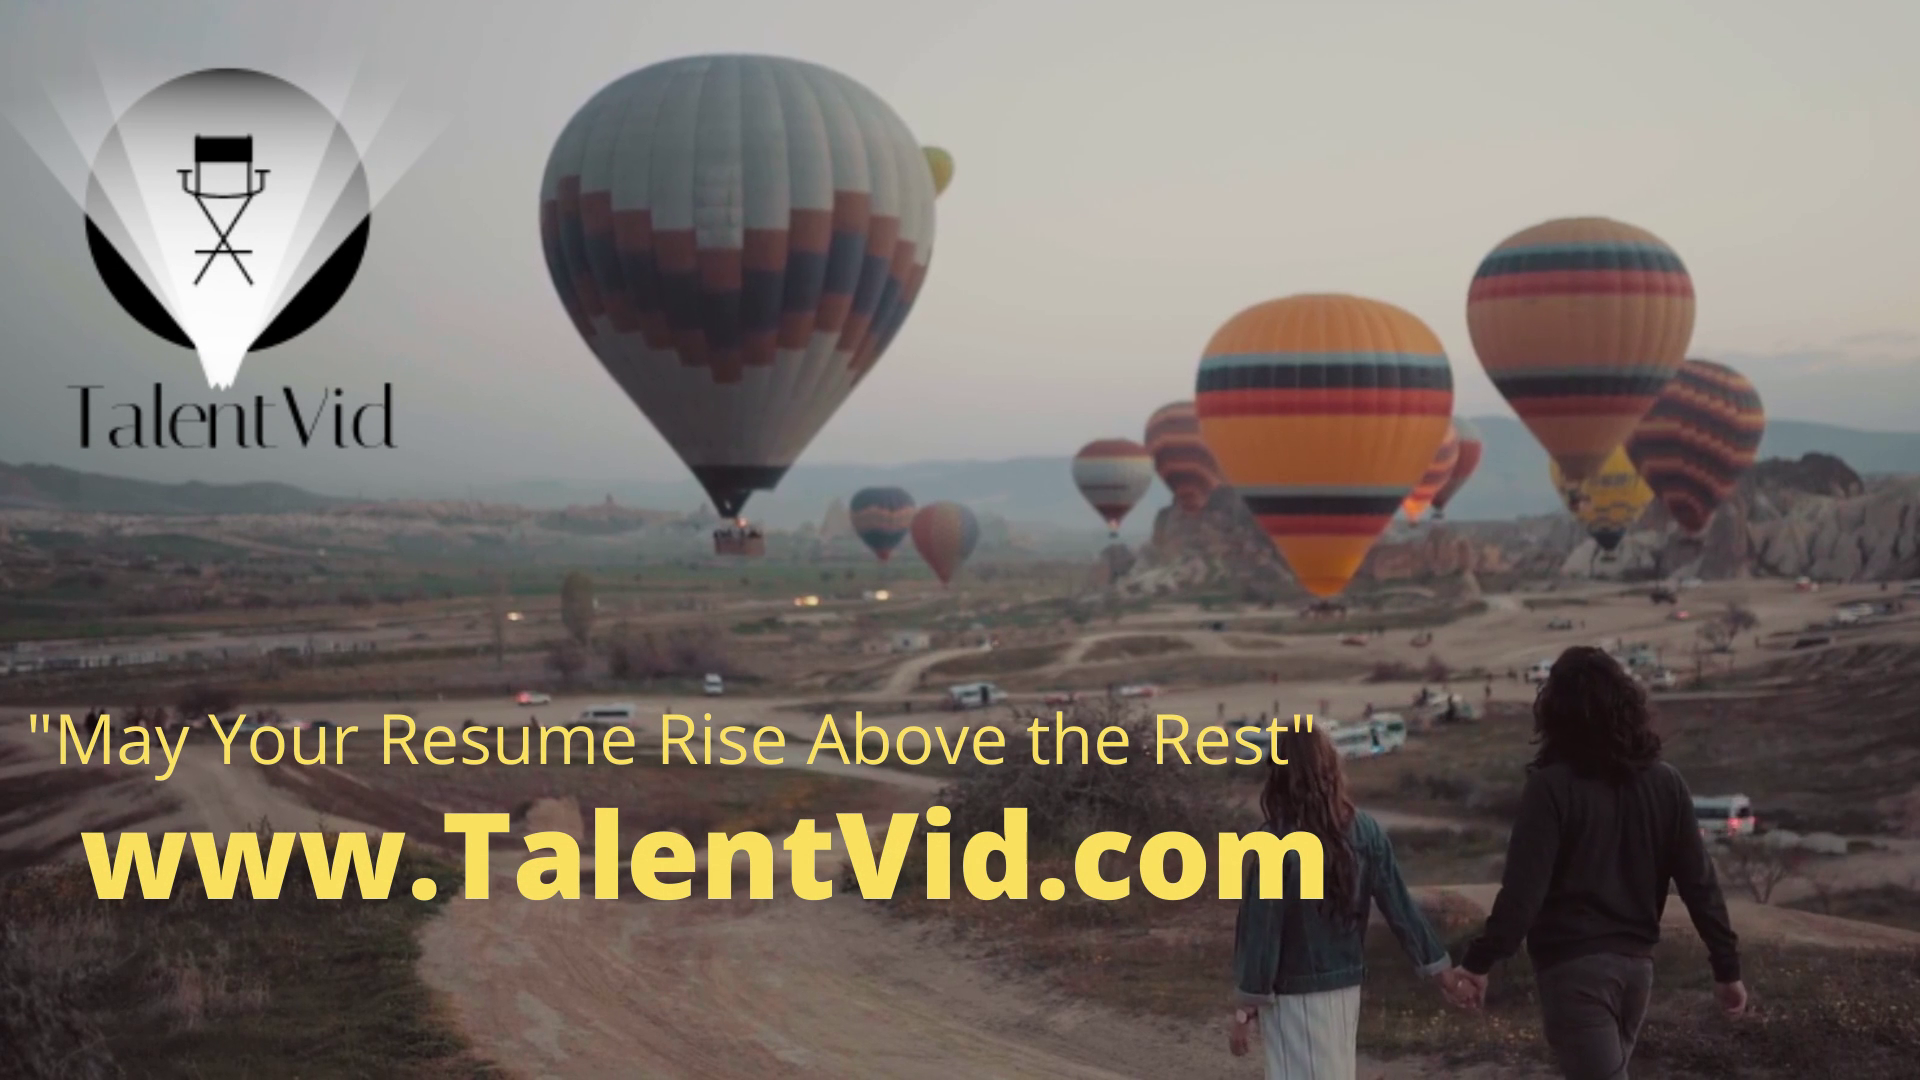 How Do I Spend Less Time In Hiring? Optimize Workflow With Video Resume Services